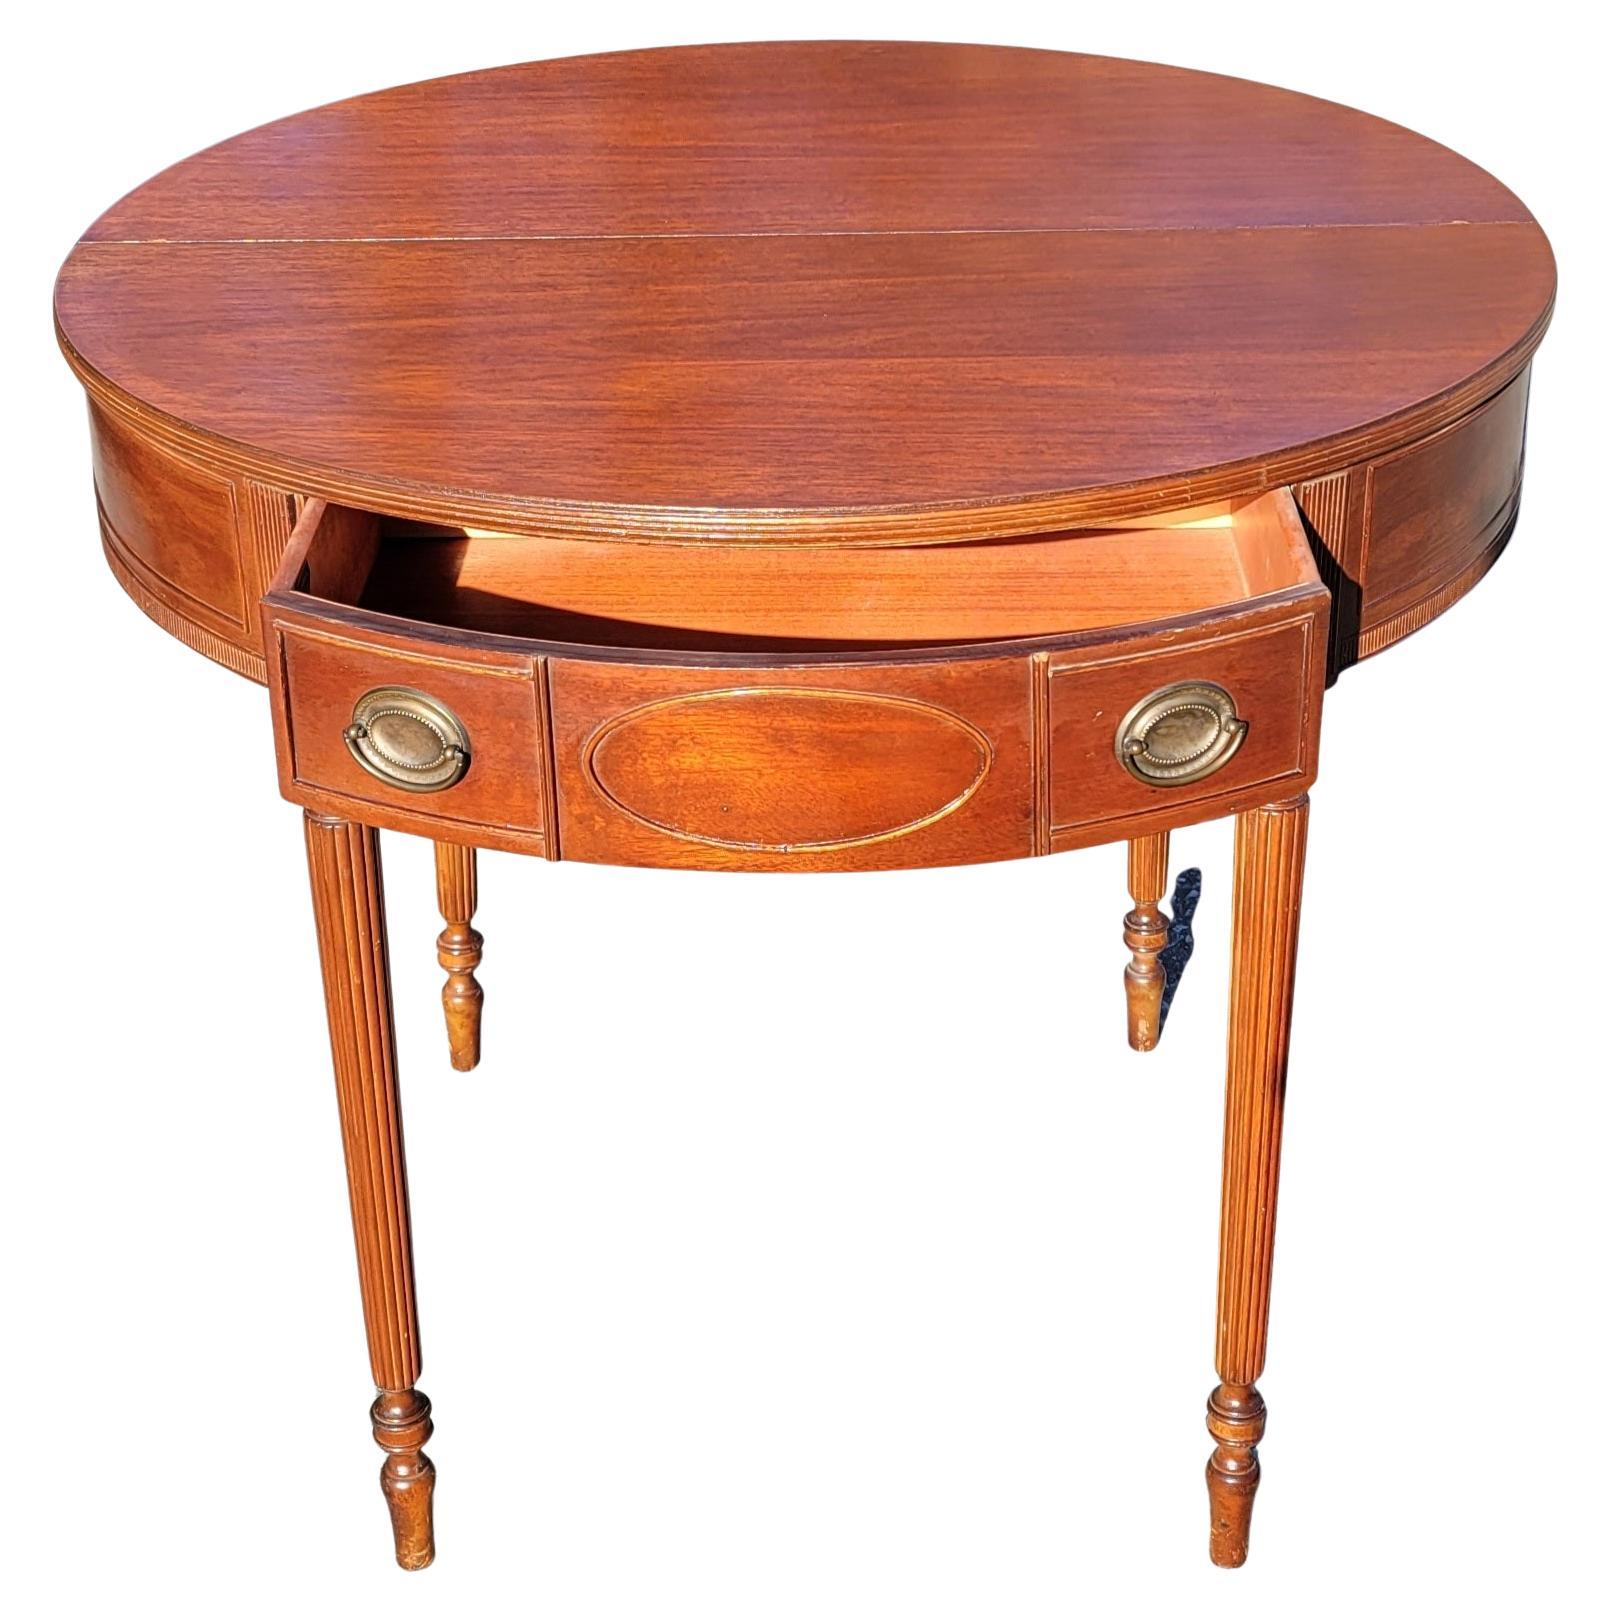 A exquisite 19th Century American Federal Hepplewhite Mahogany Demi-Lune Flip-Top Console table or Card Table in very good antique condition. Table has completely refinished recently. It features a large drawer with plenty of storage and reeded